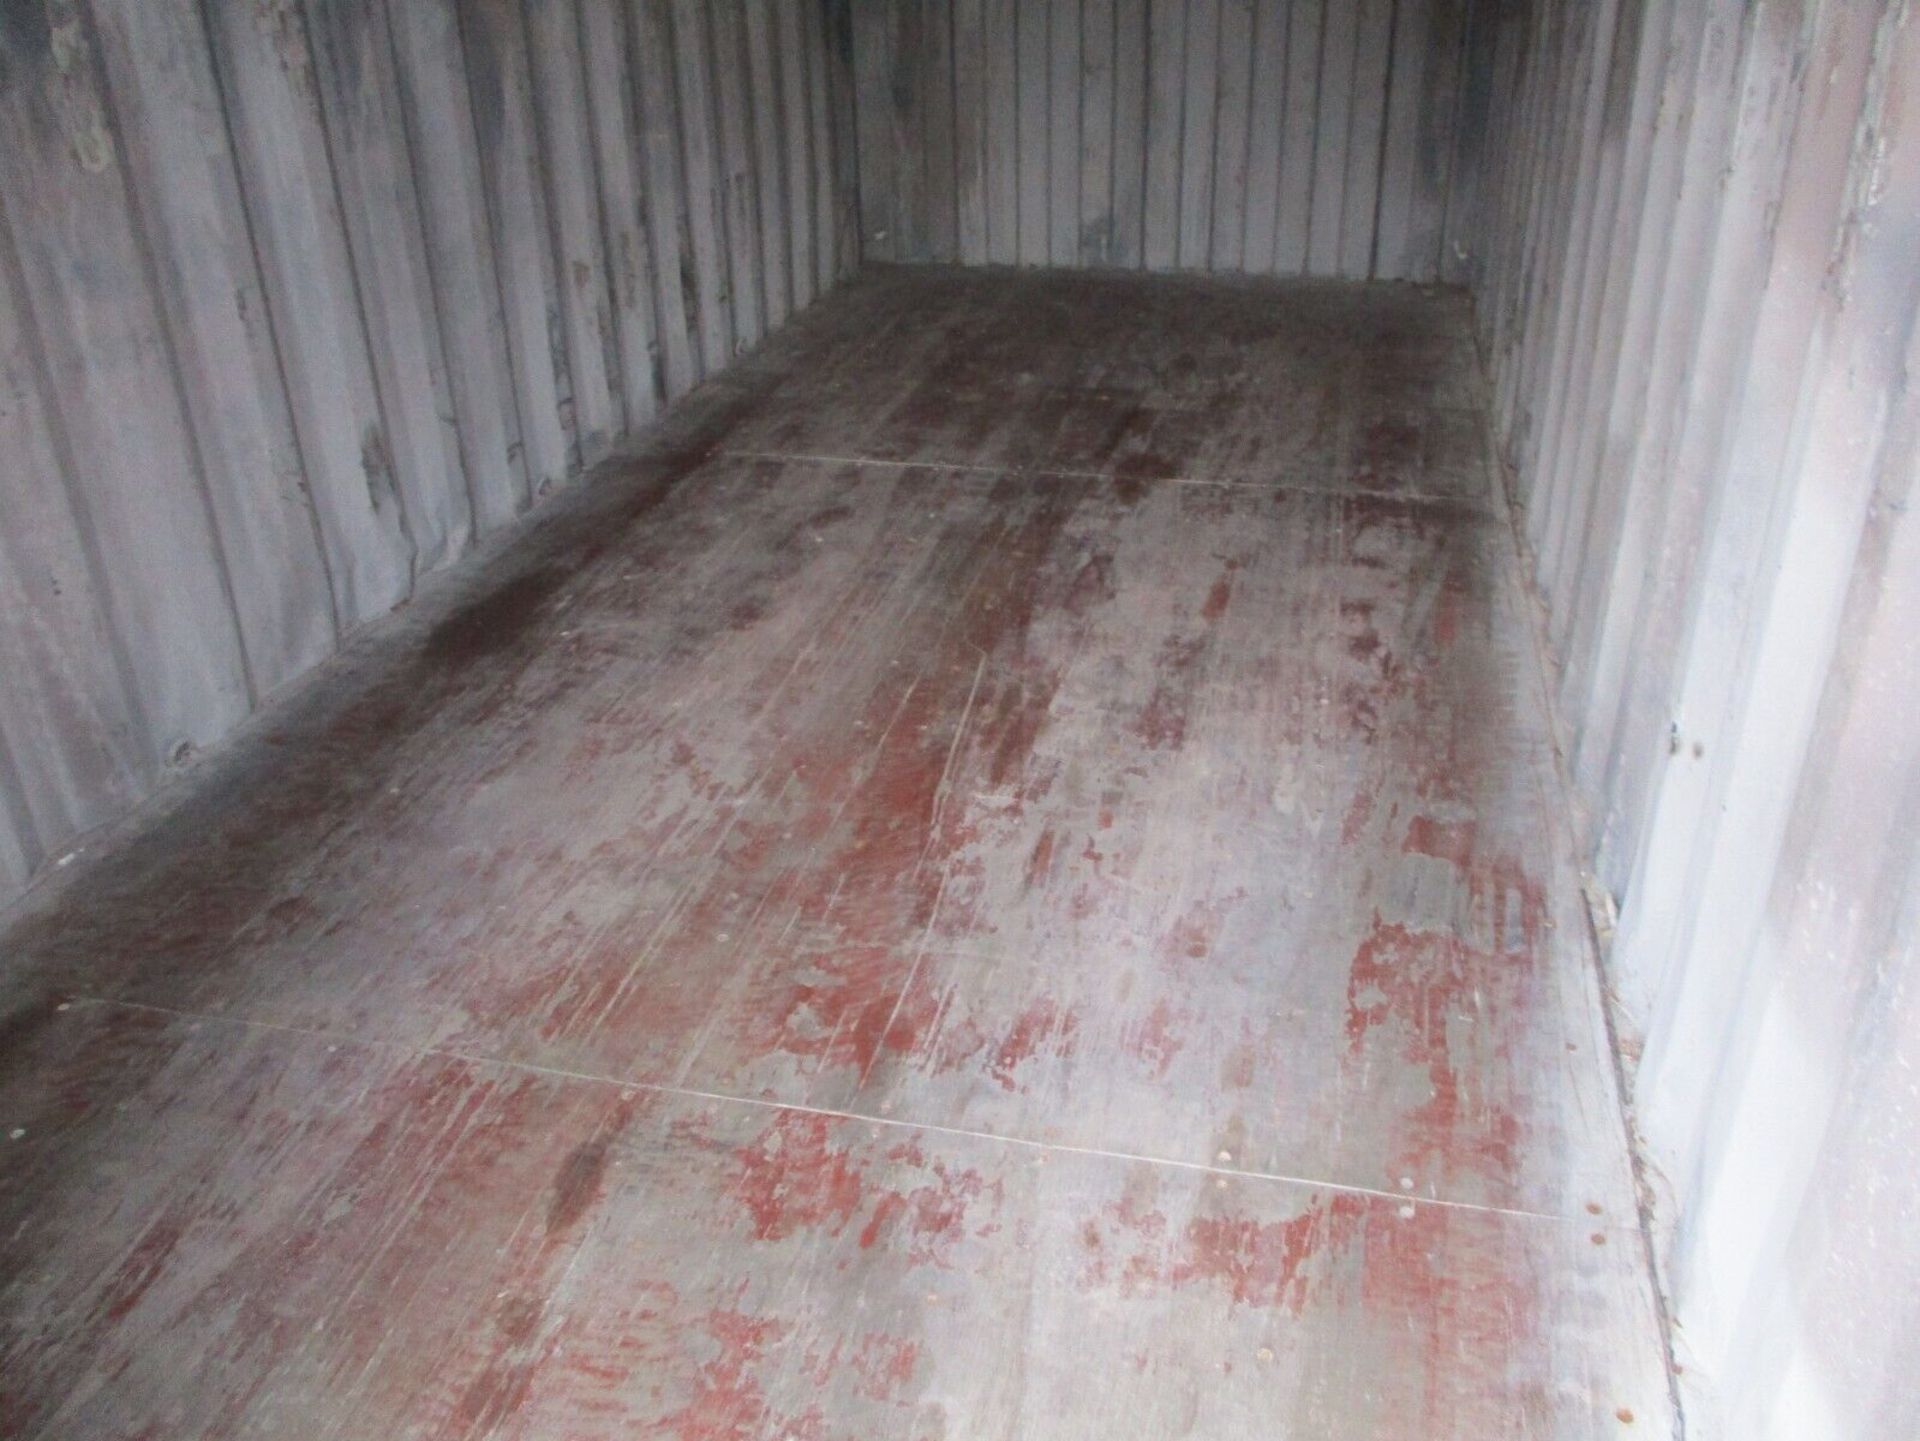 SHIPPING CONTAINER 20 FEET LONG X 8 FEET WIDE - Image 9 of 9